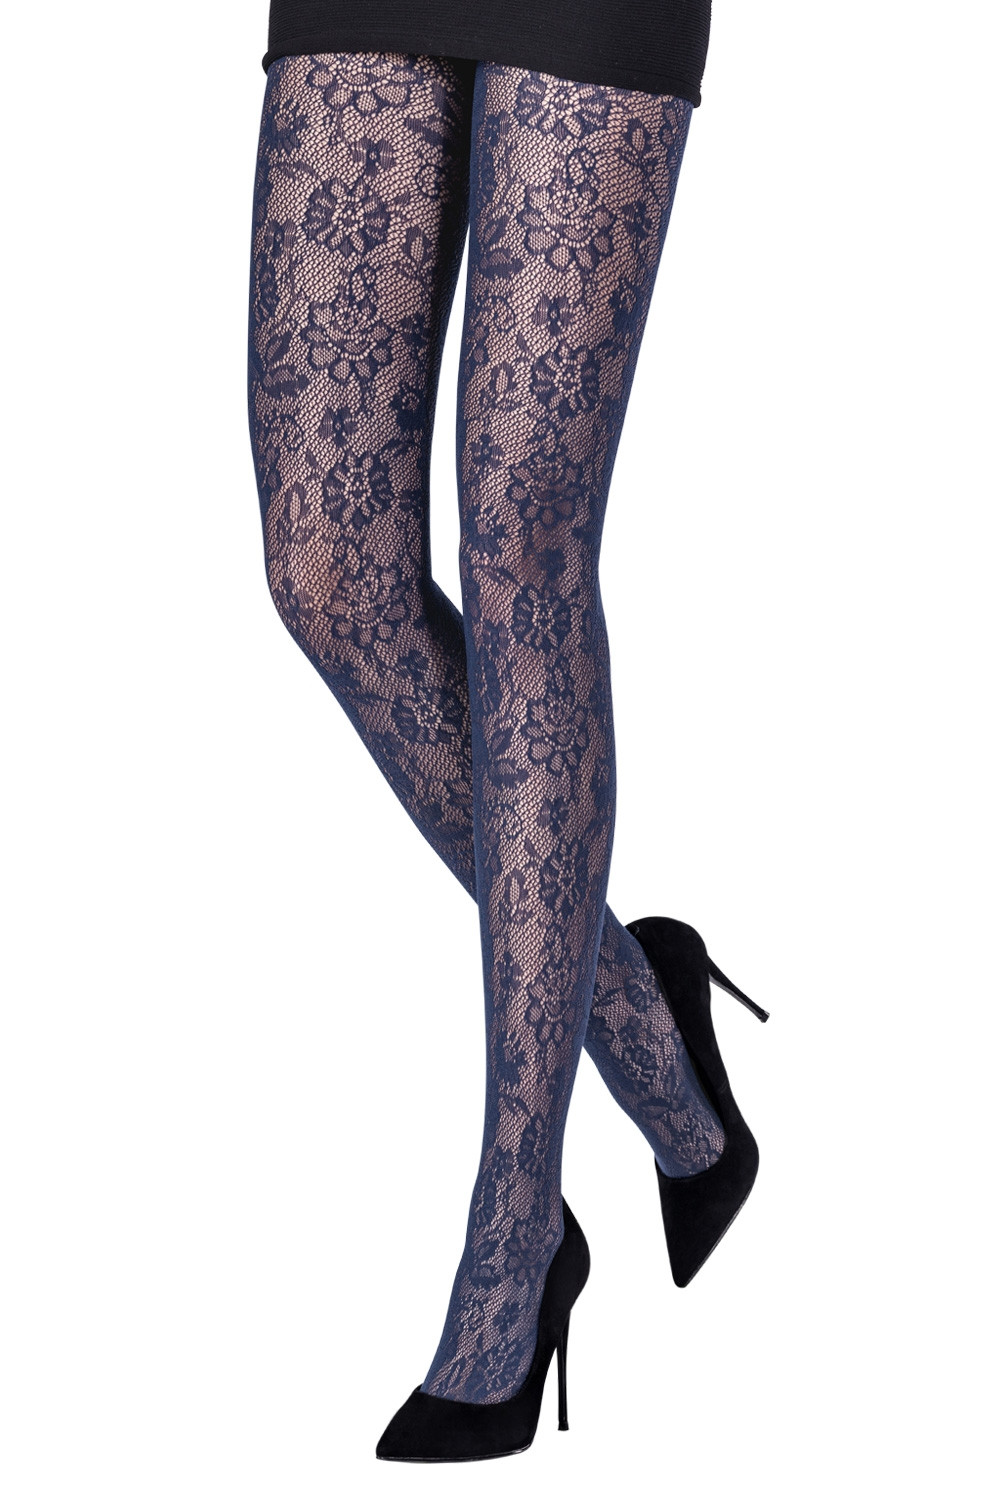 Women's Tights, Patterned Tights